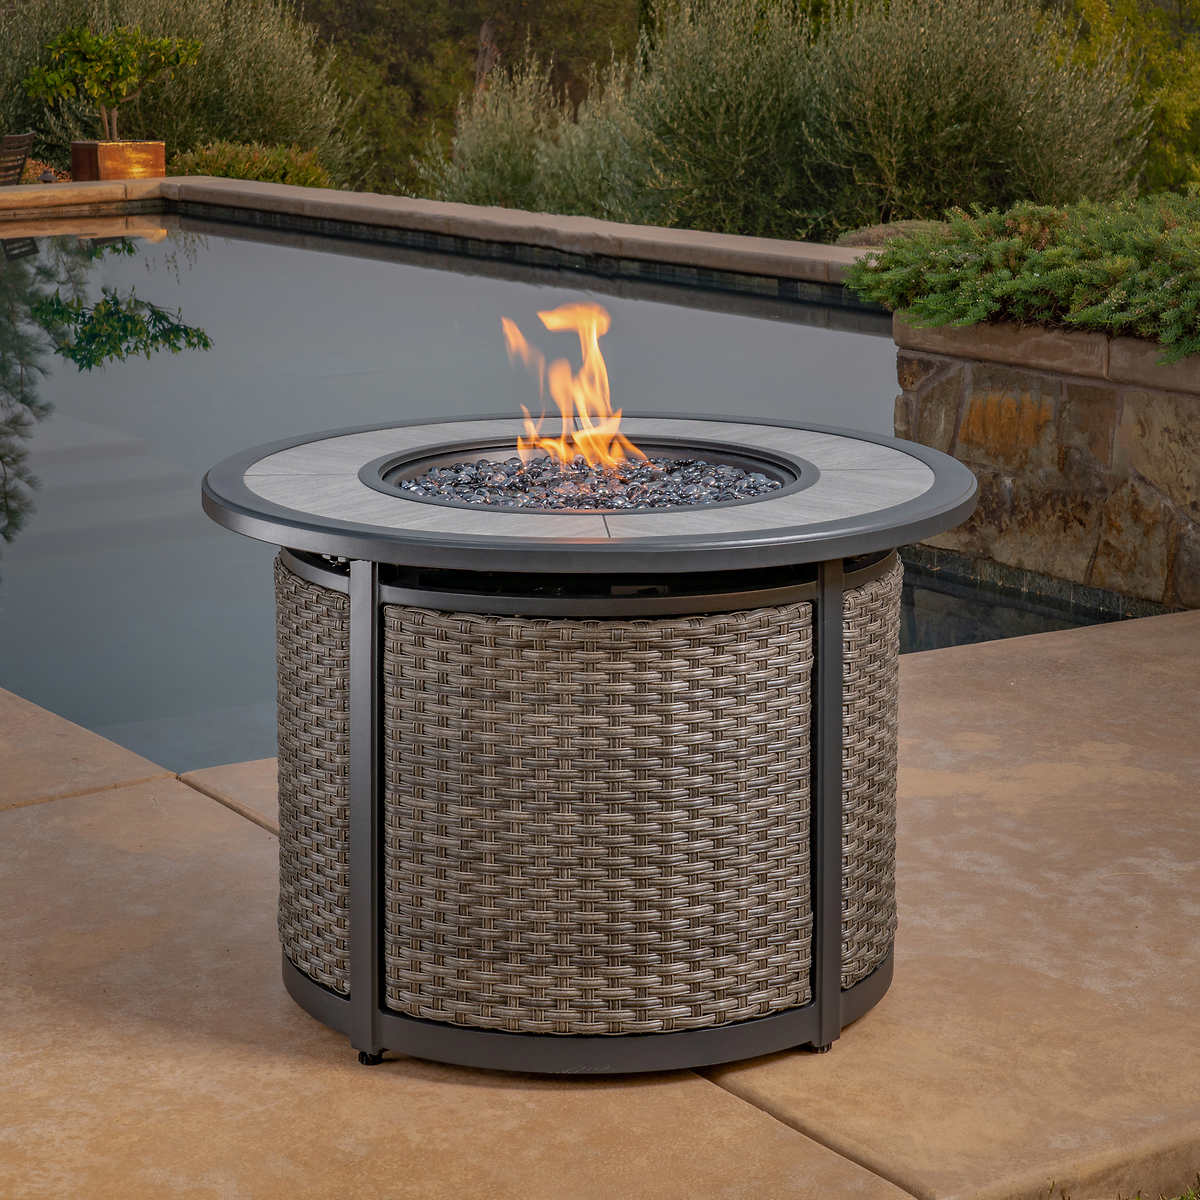 Madison Fire Pit Table Costco, Fire Pit Table Burner